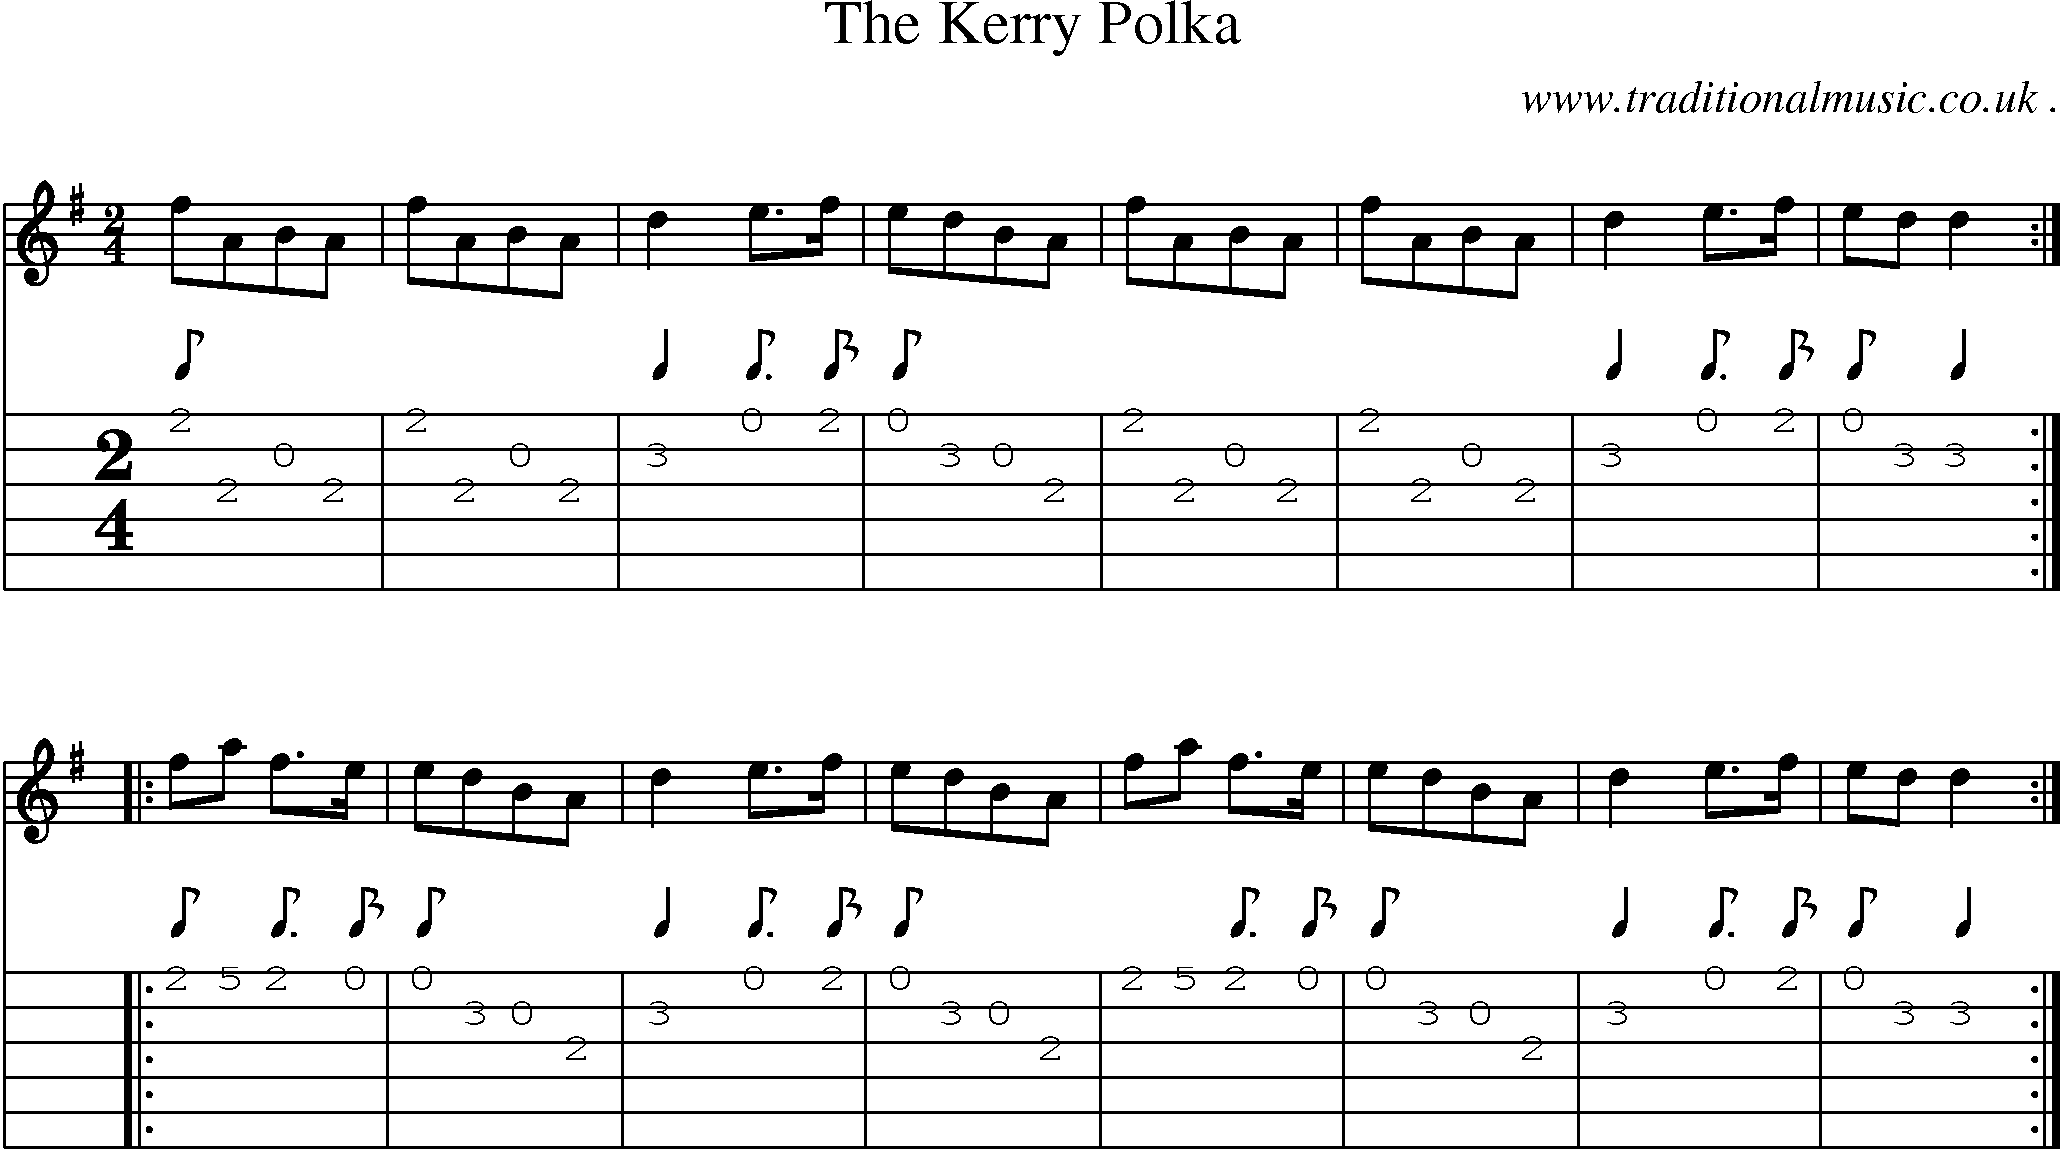 Sheet-Music and Guitar Tabs for The Kerry Polka